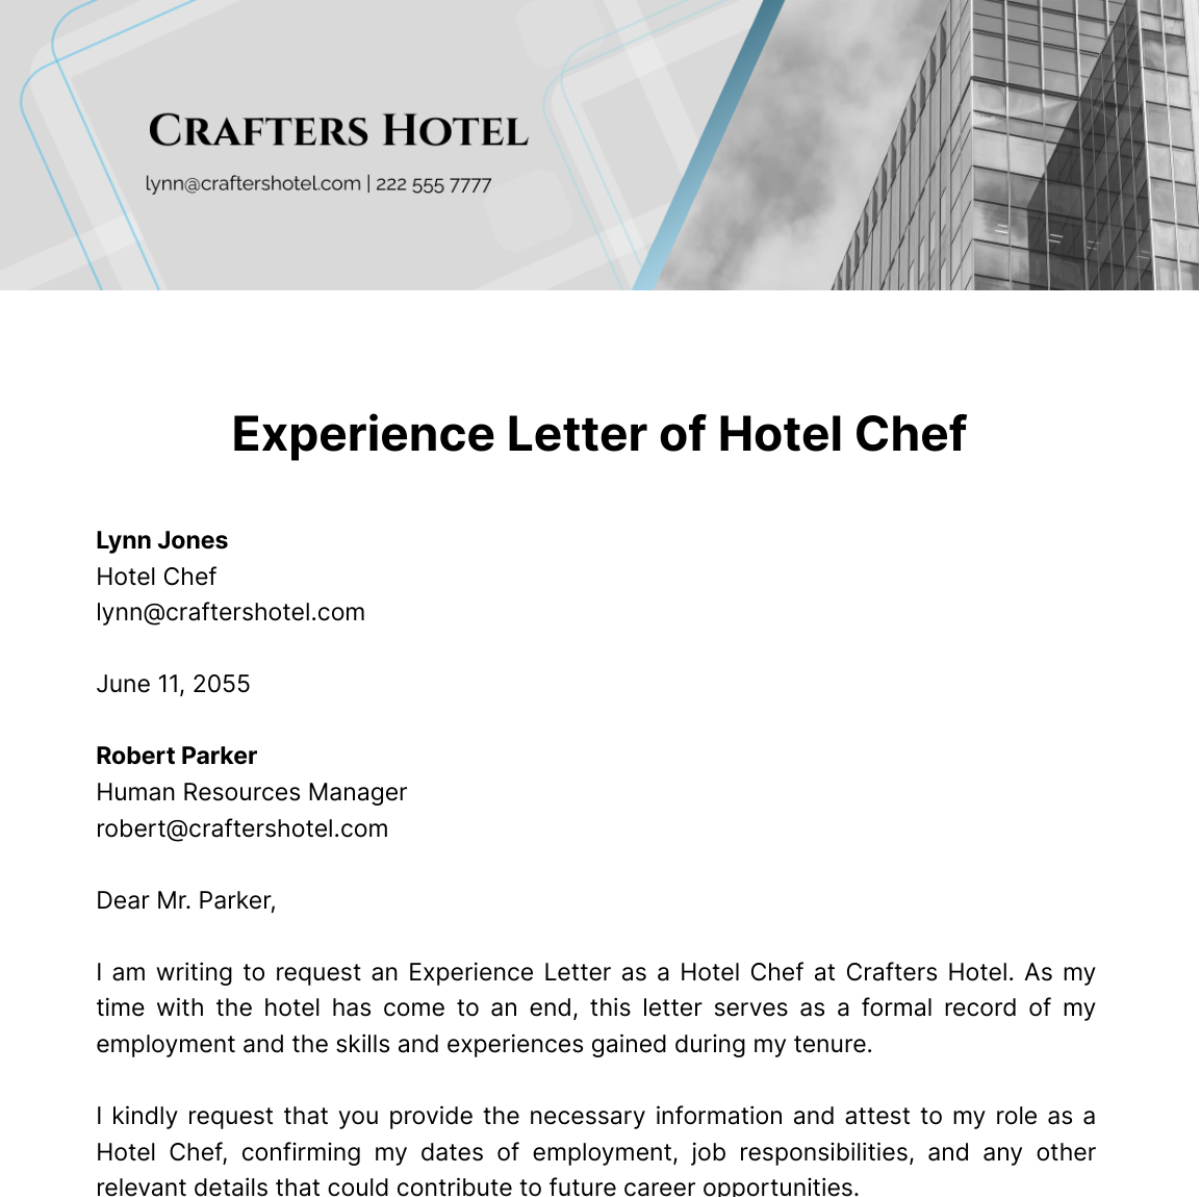 Experience Letter of Hotel Chef   Template